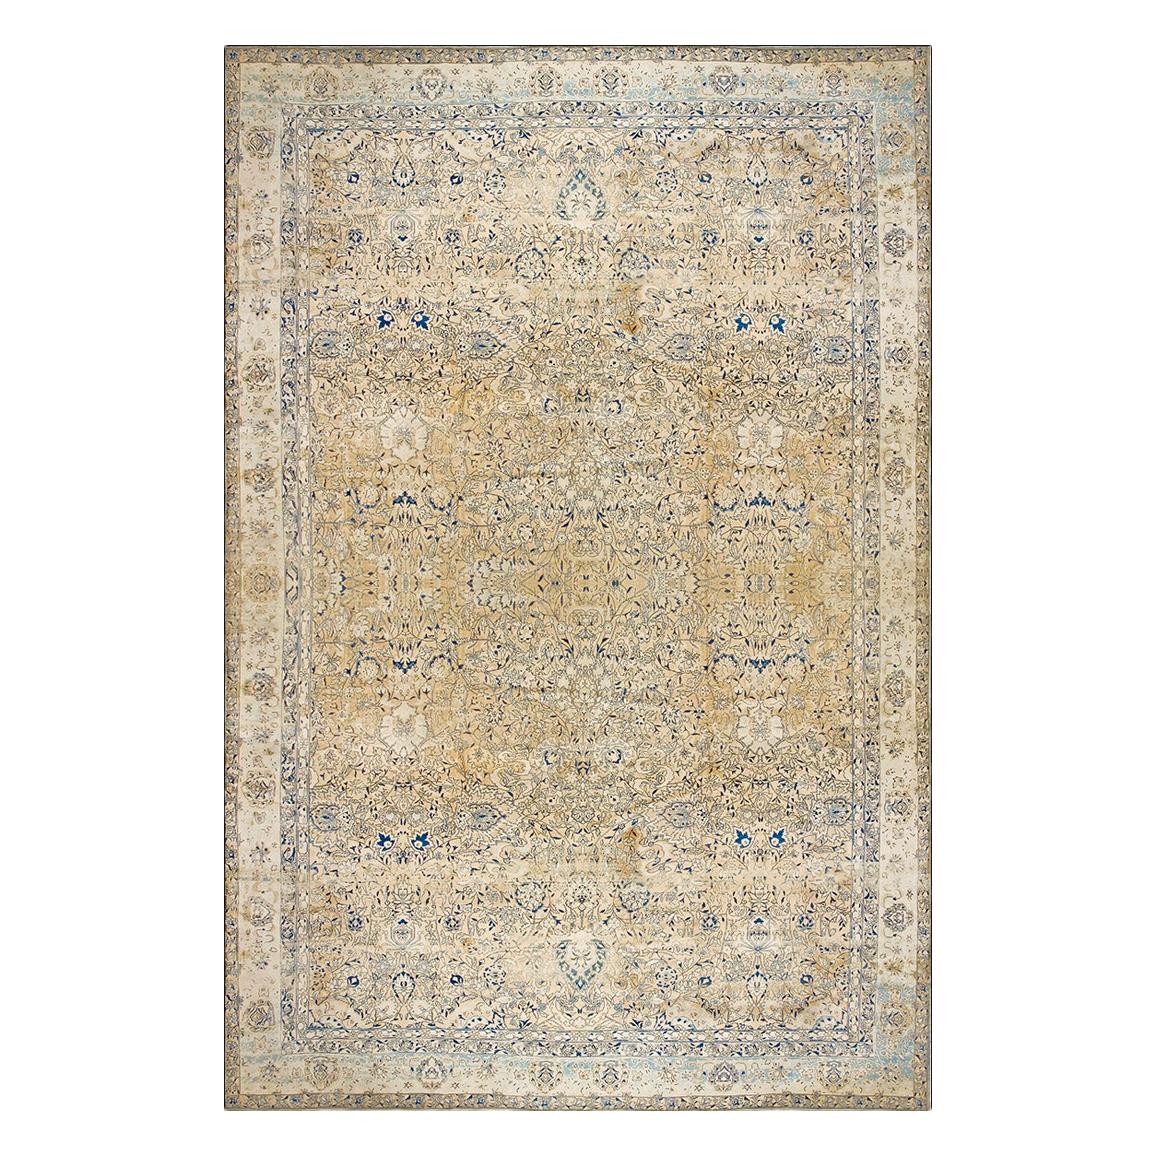 Early 20th Century Indian Lahore Carpet ( 13'6" x 21'6" - 412 x 655 cm )